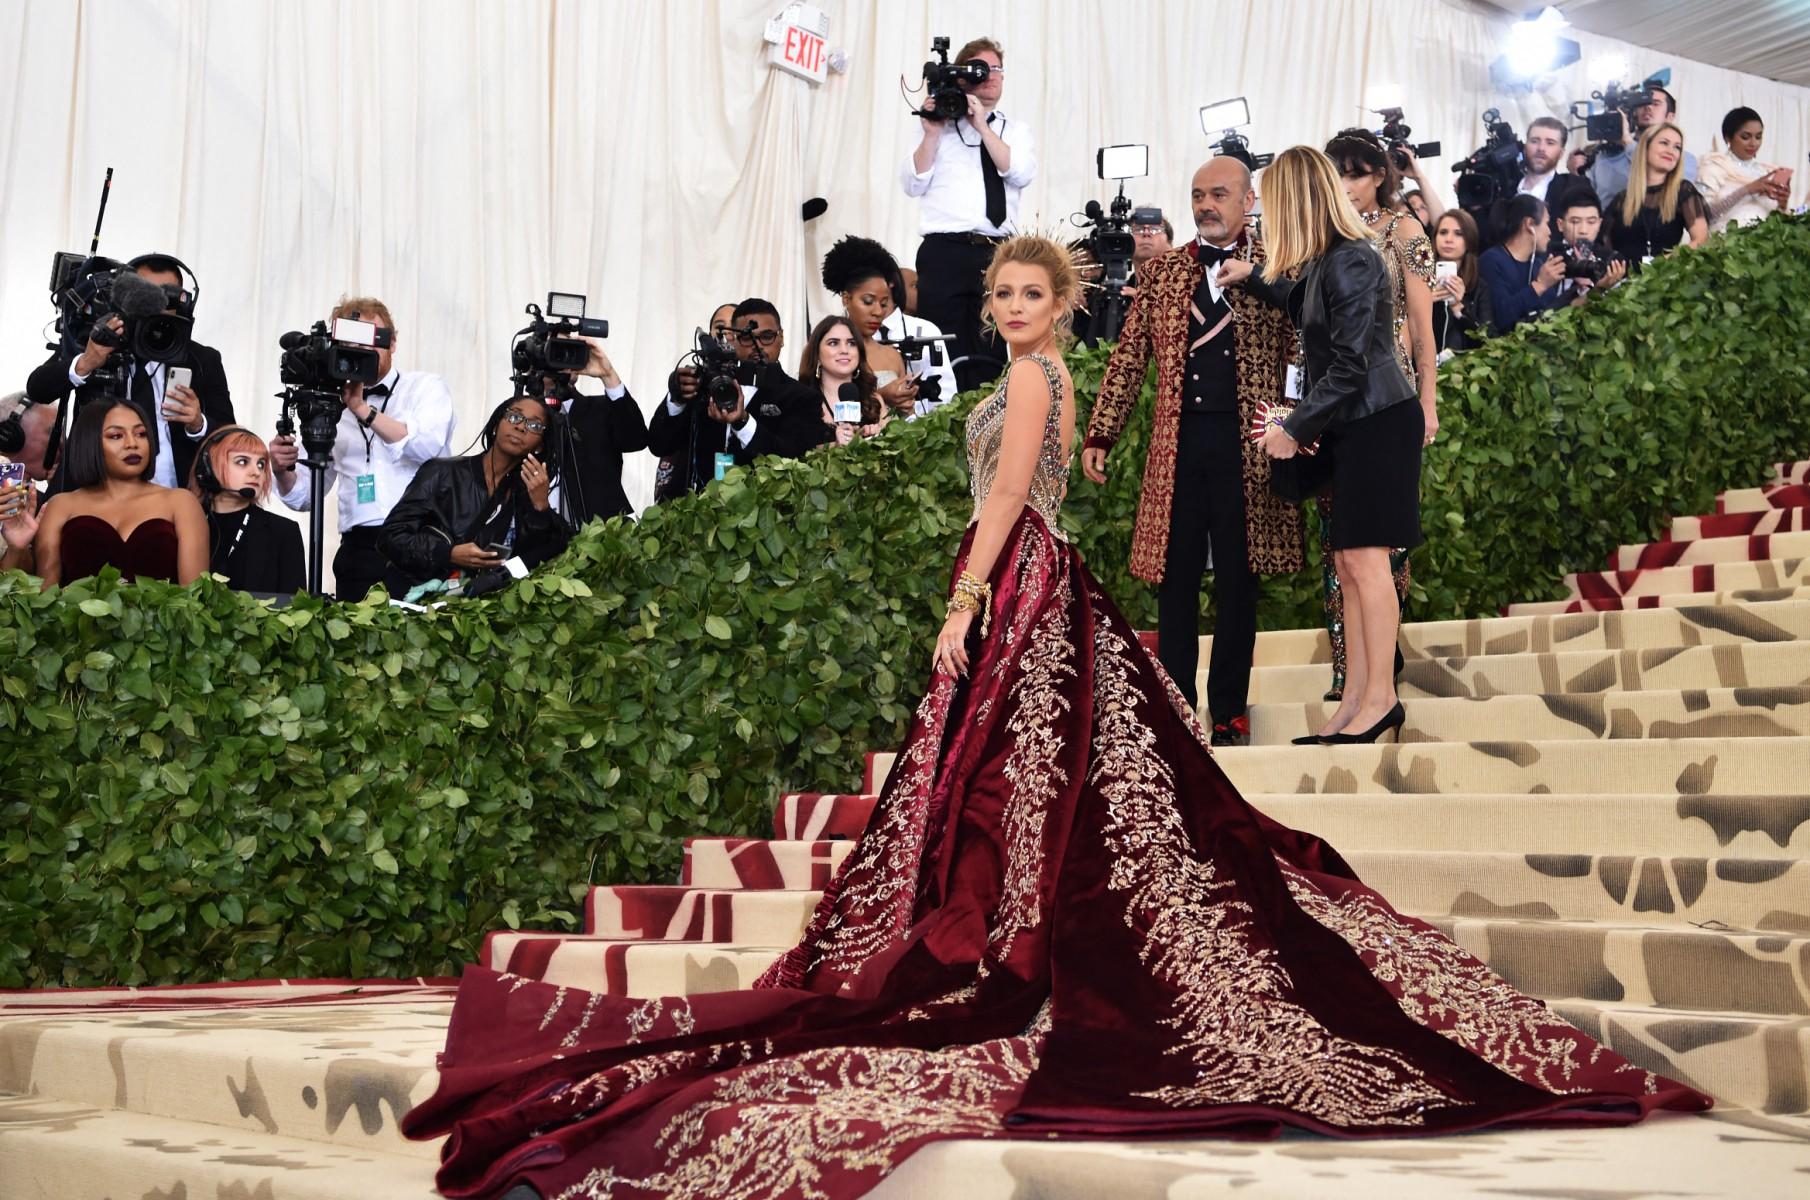 Blake Lively rocked a stunning crimson Versace gown at the 2018 MET Gala, featuring a beautifully embroidered bodice, jewelled straps, and an incredibly long train, all painstakingly crafted by hand over 600 hours. (Pic/AFP)